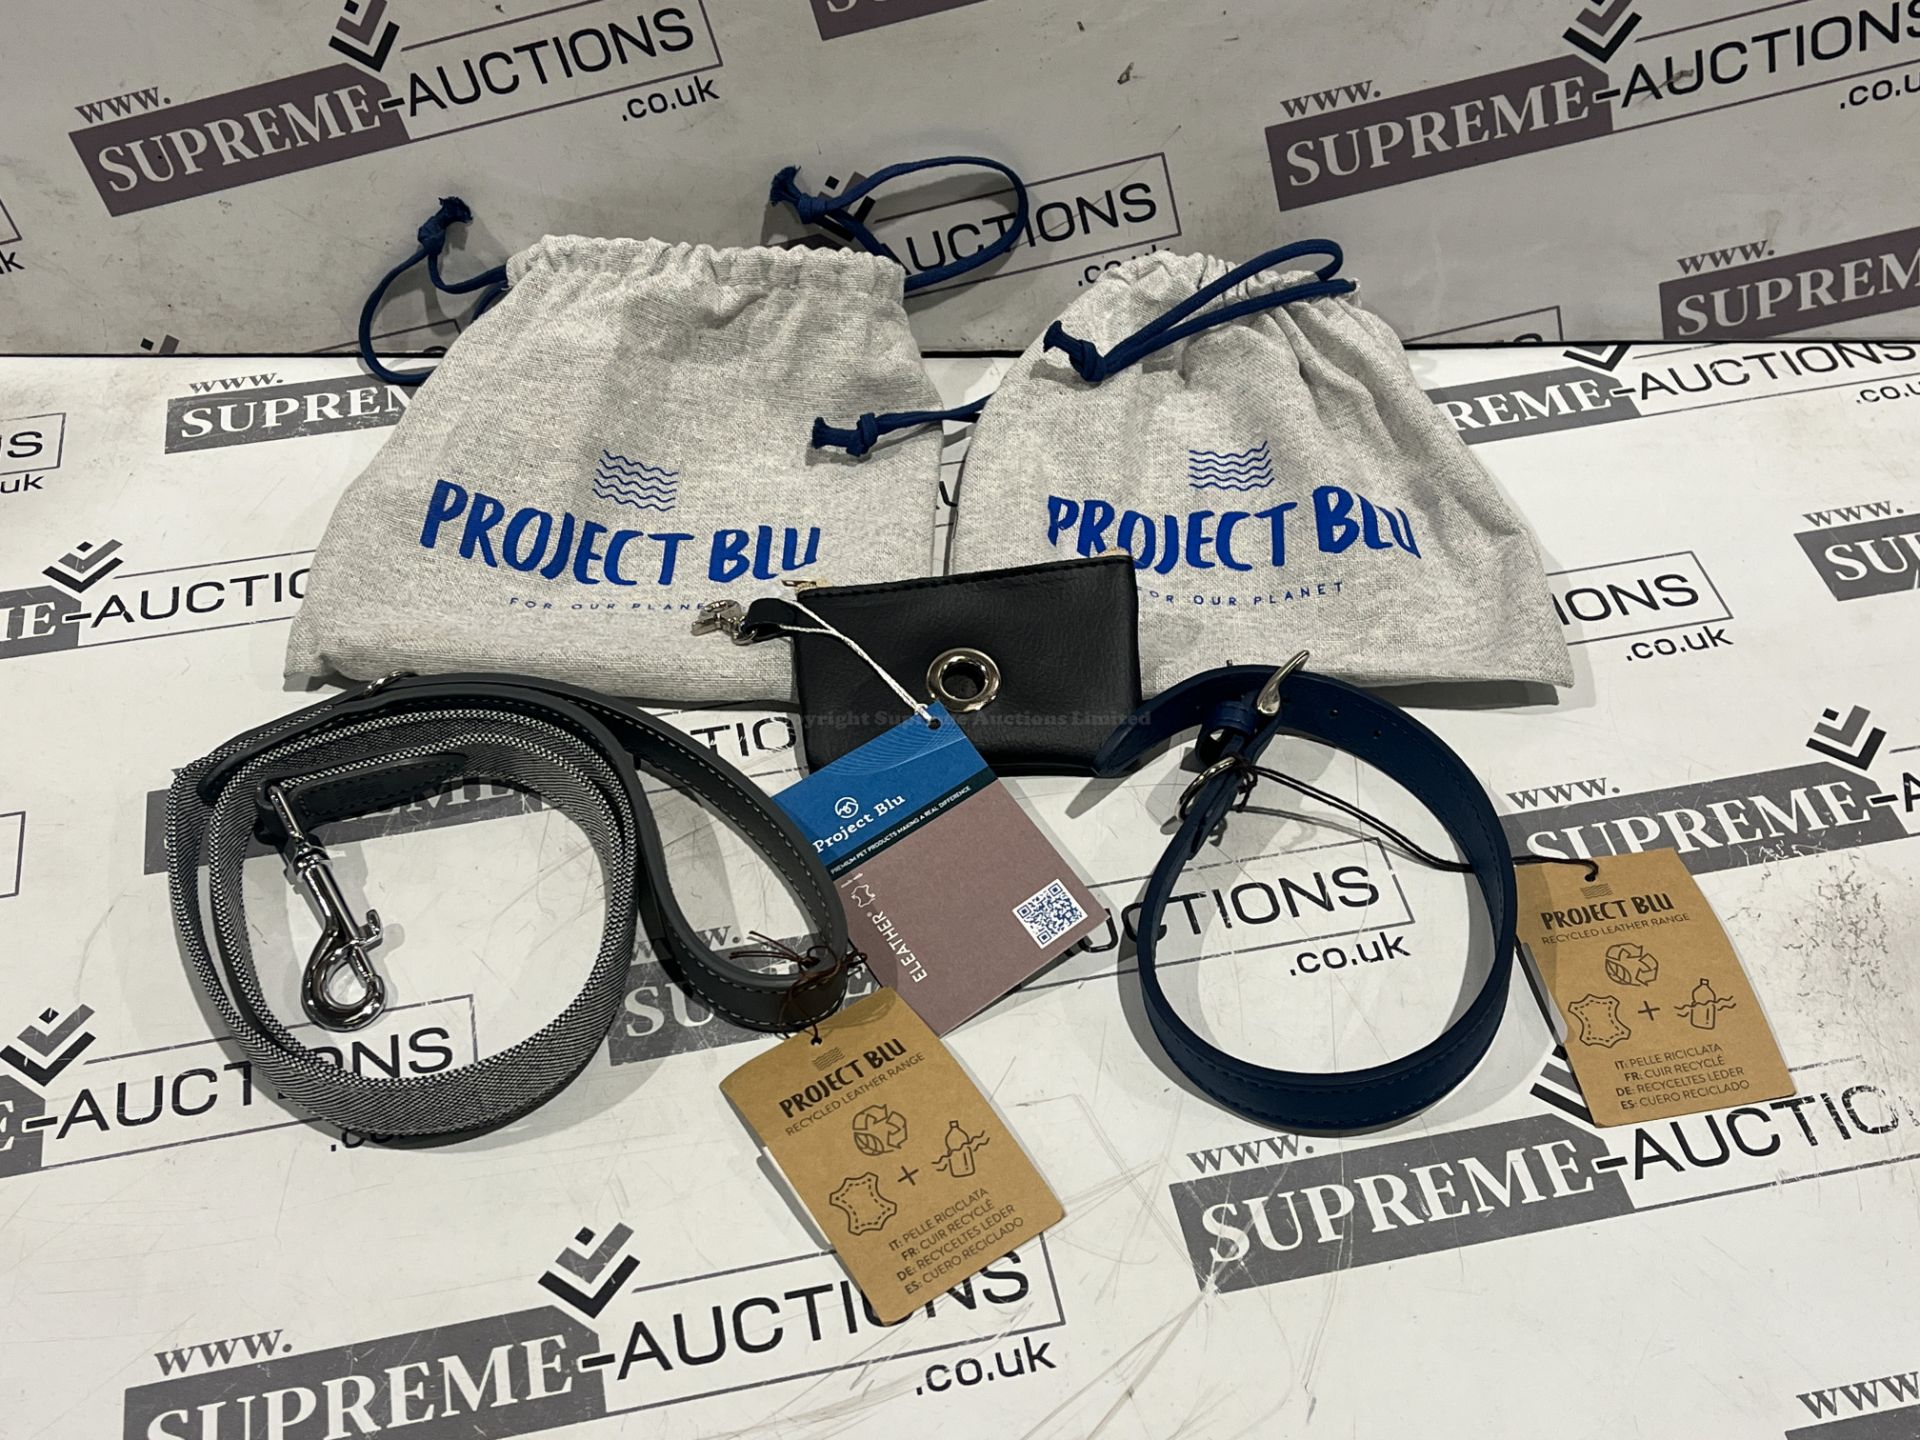 30 PIECE ASSORTED PROJECT BLU LOT INCLUDING LEASHES, COLLARS, POOP BAGS ETC S1-12